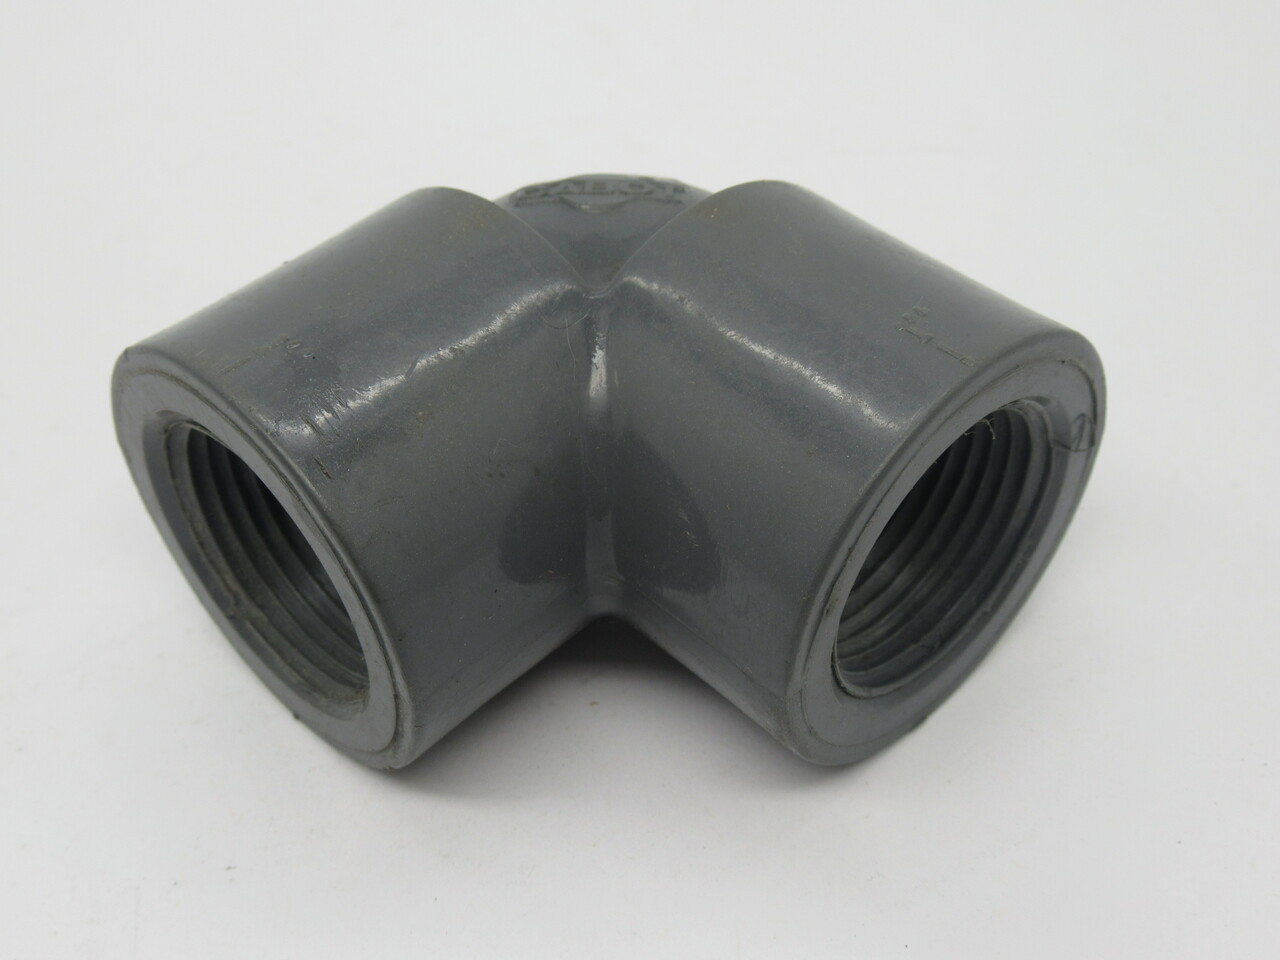 Cabot SCH-80 1" Elbow Threaded Pipe Fitting USED